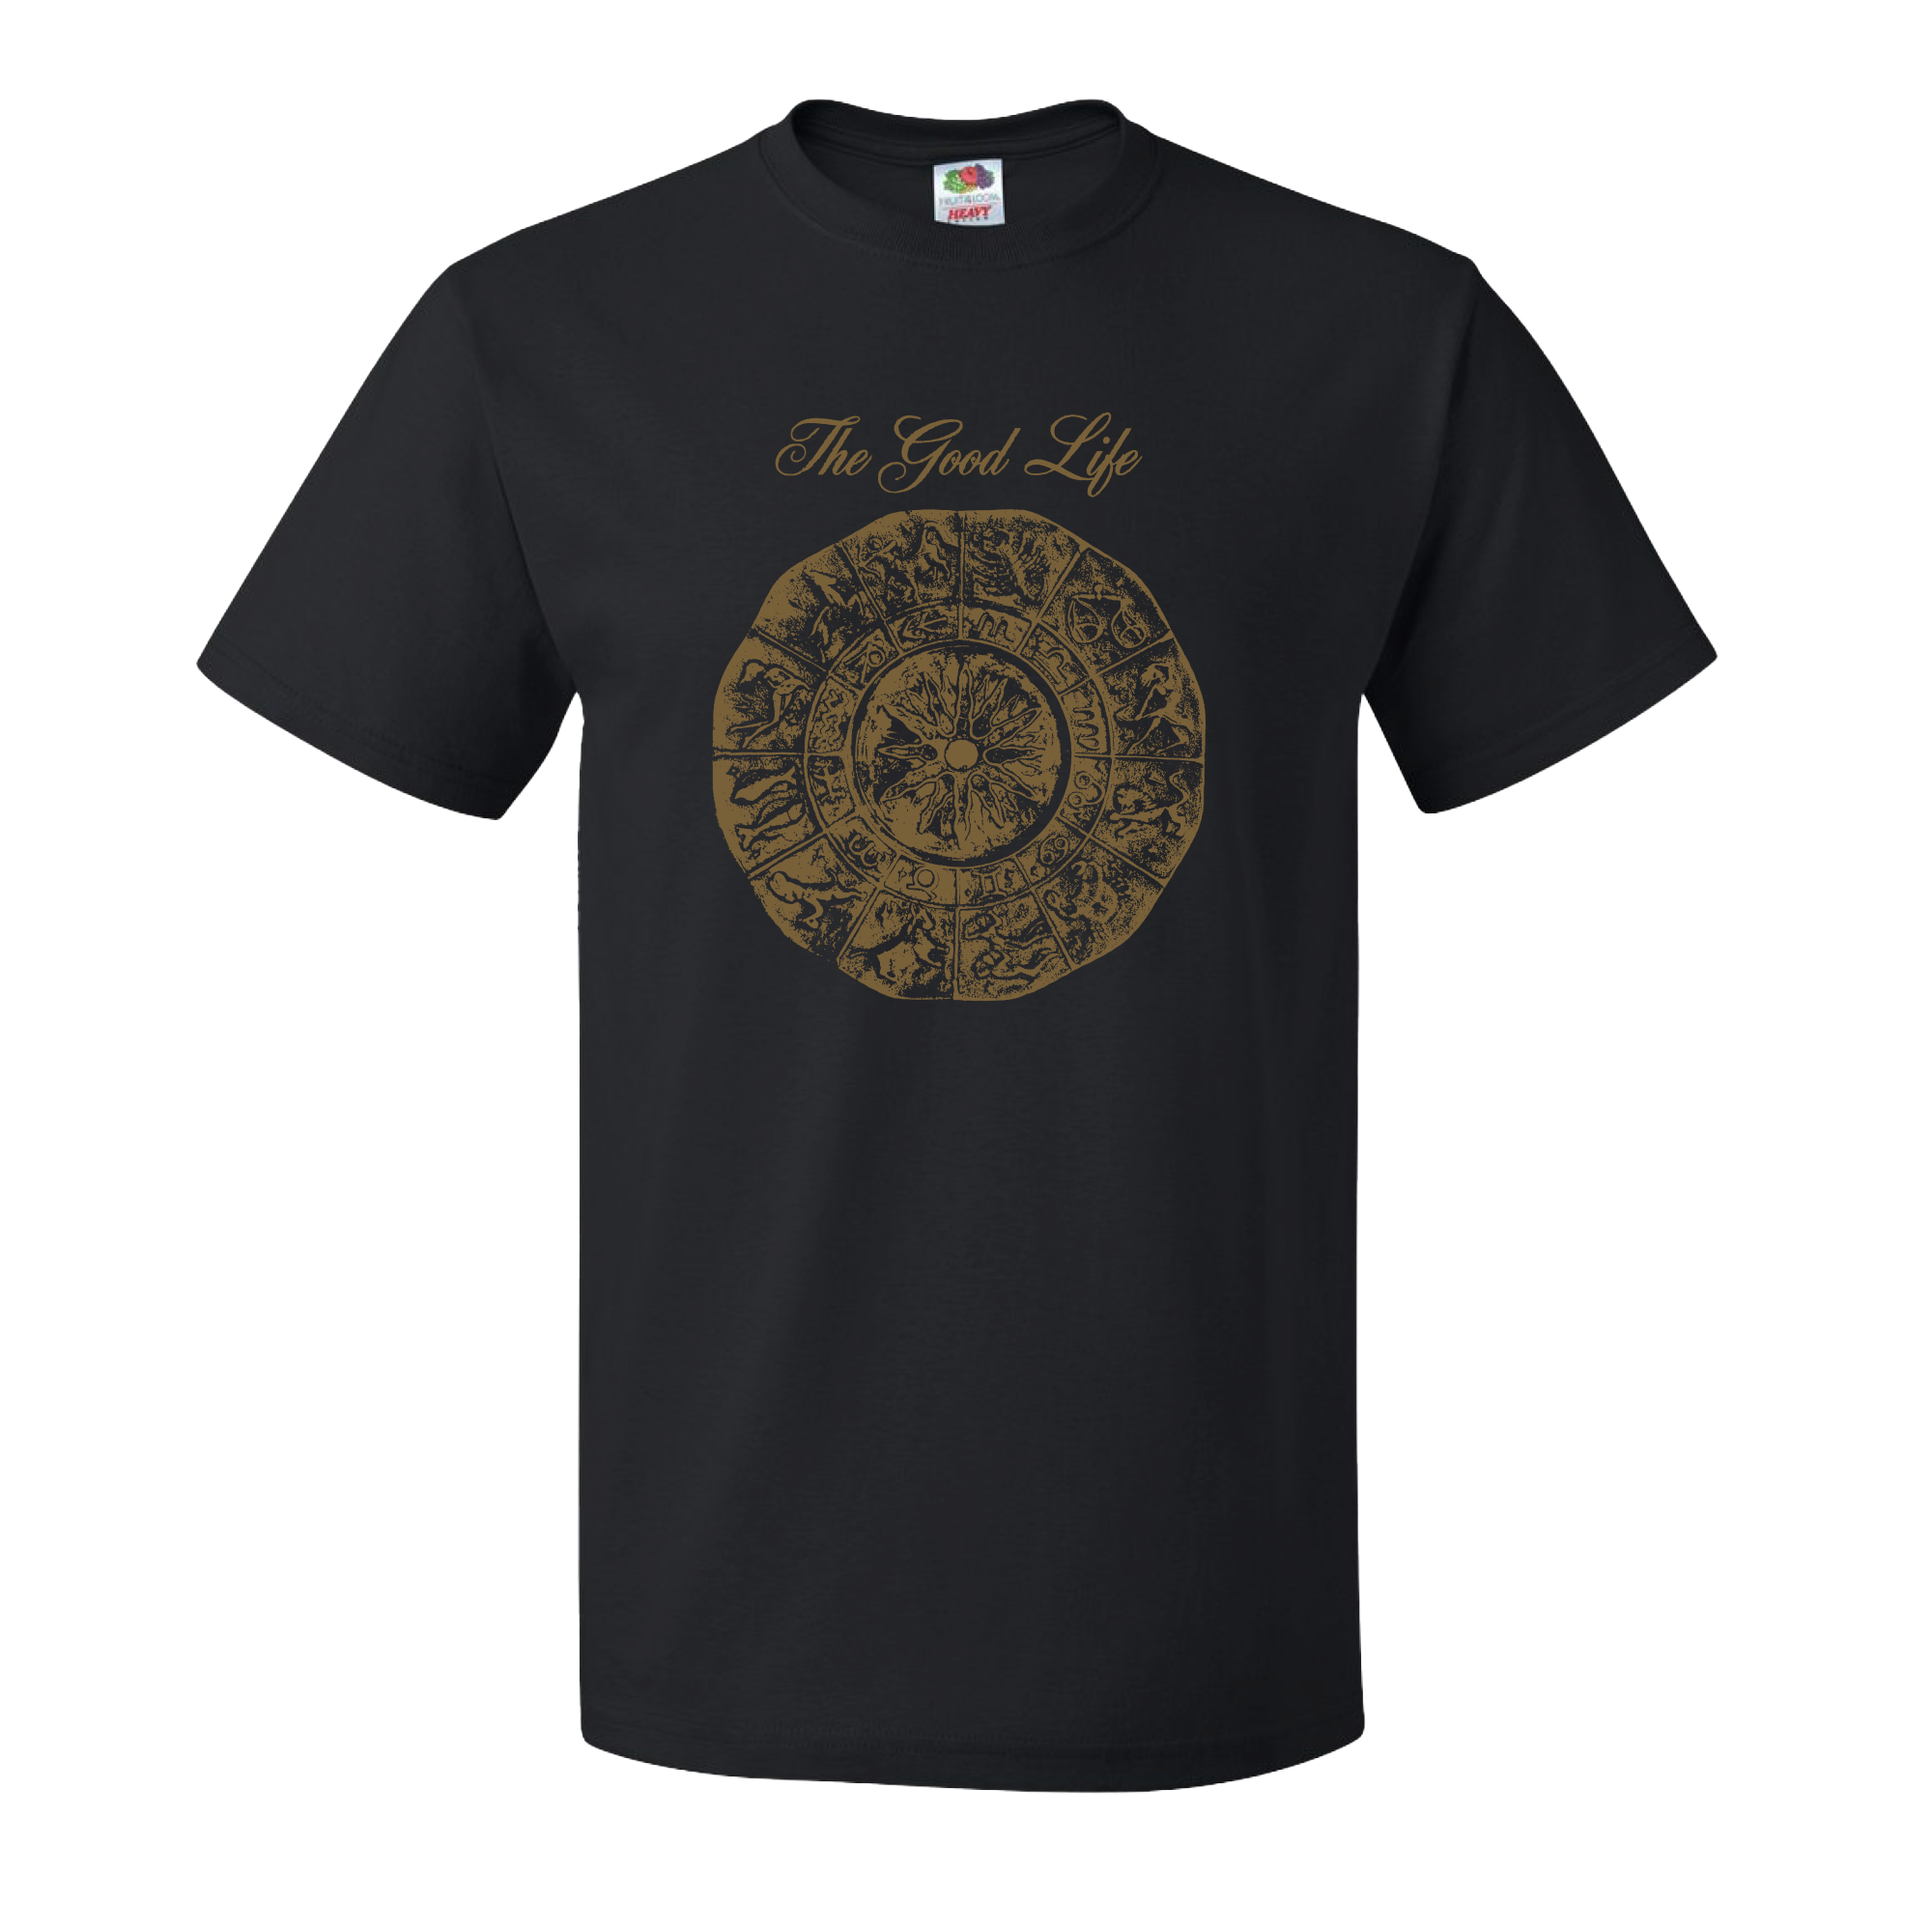 The Good Life | Album Of The Year T-Shirt - Black